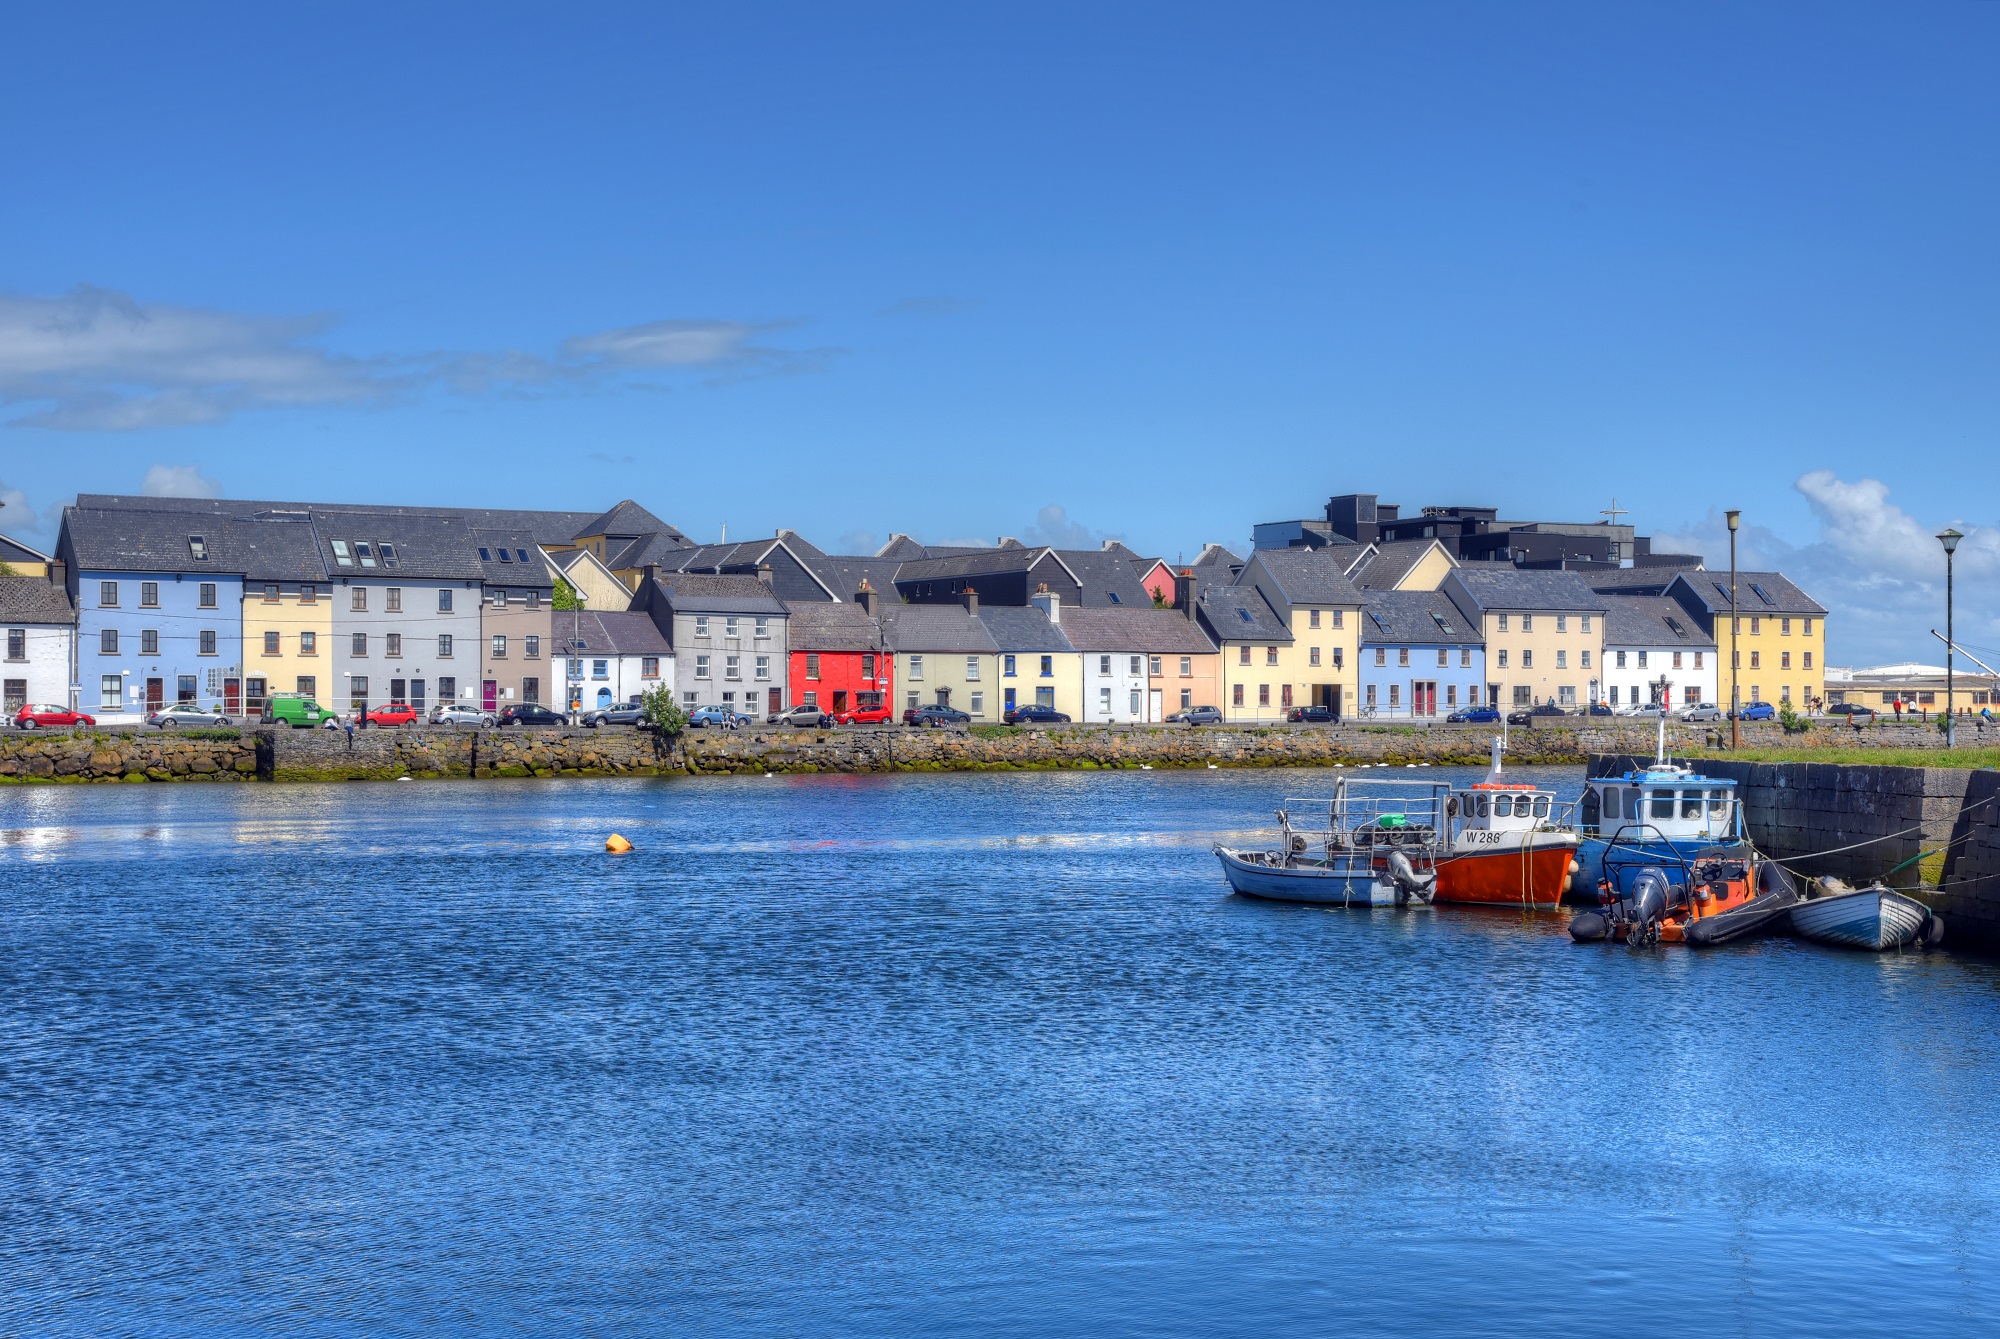 Town view of Galway in Ireland